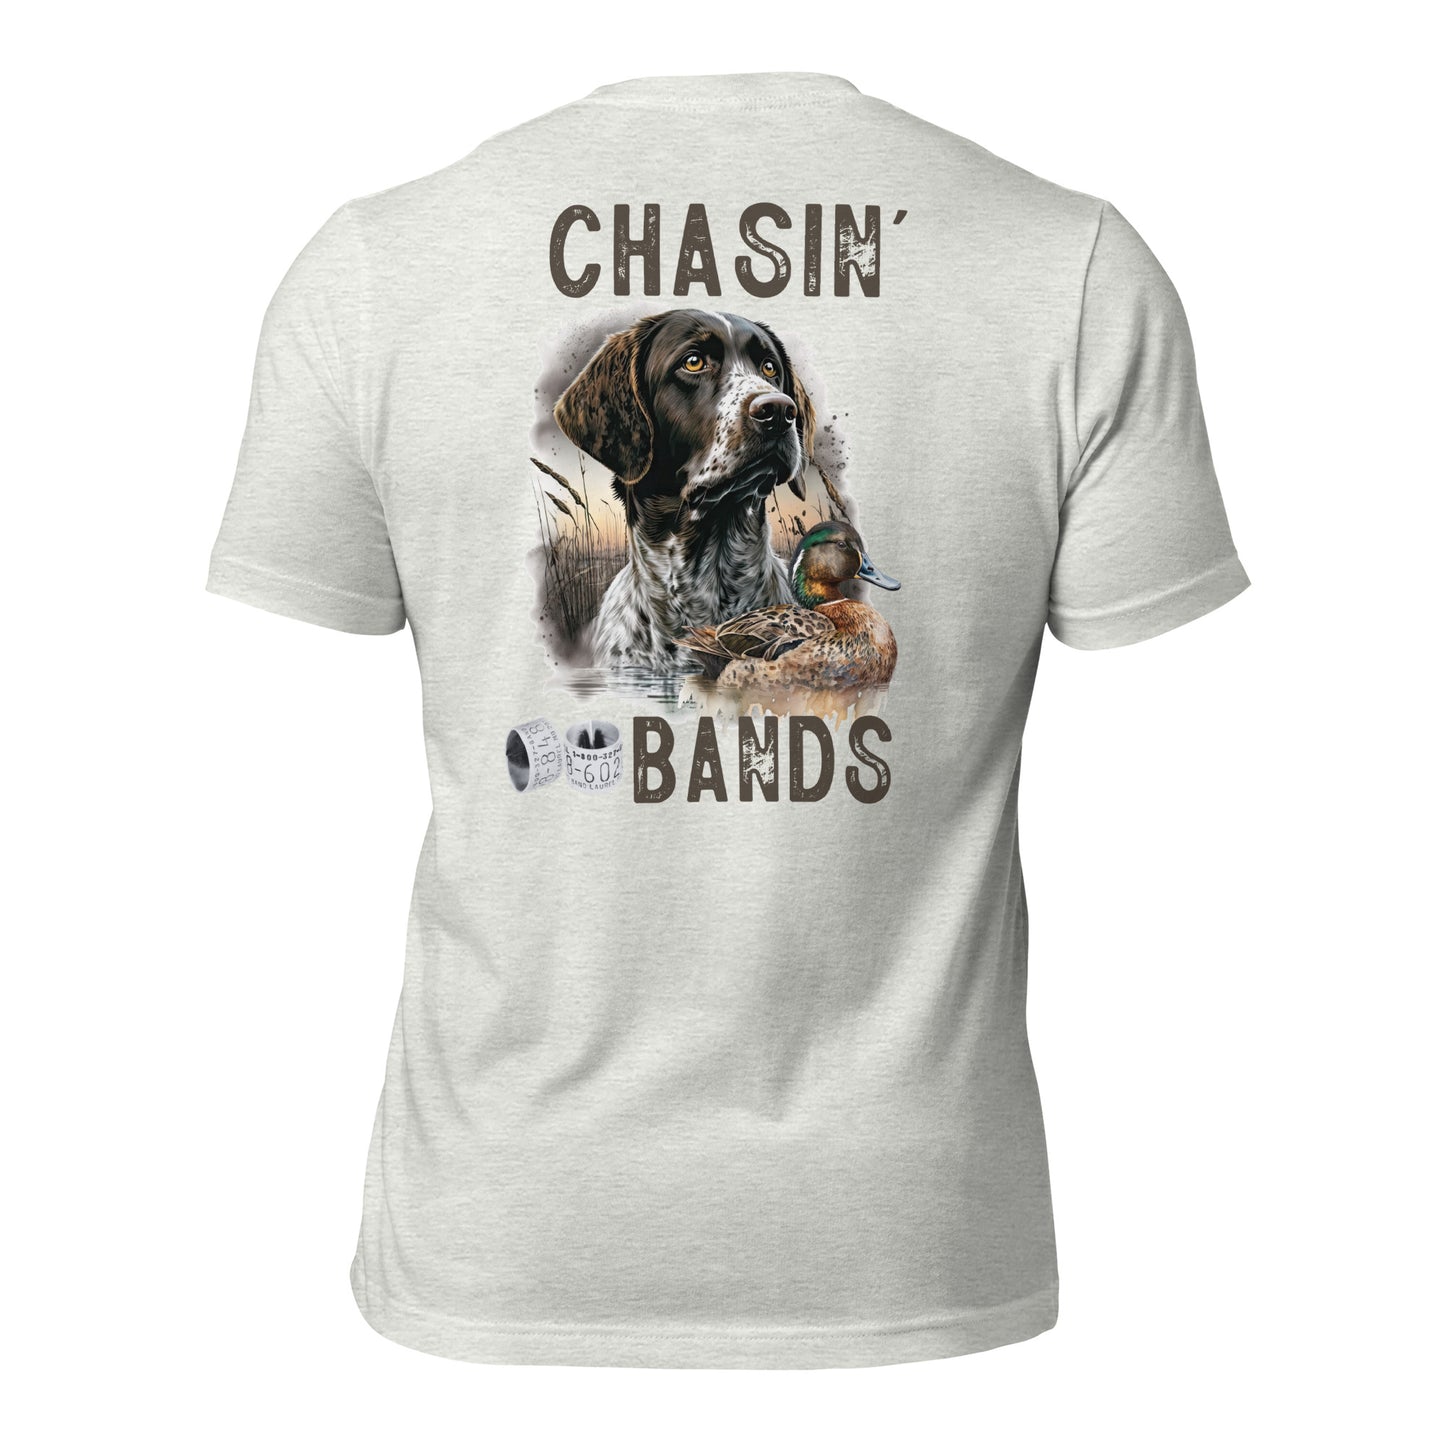 Chasin Bands Tee